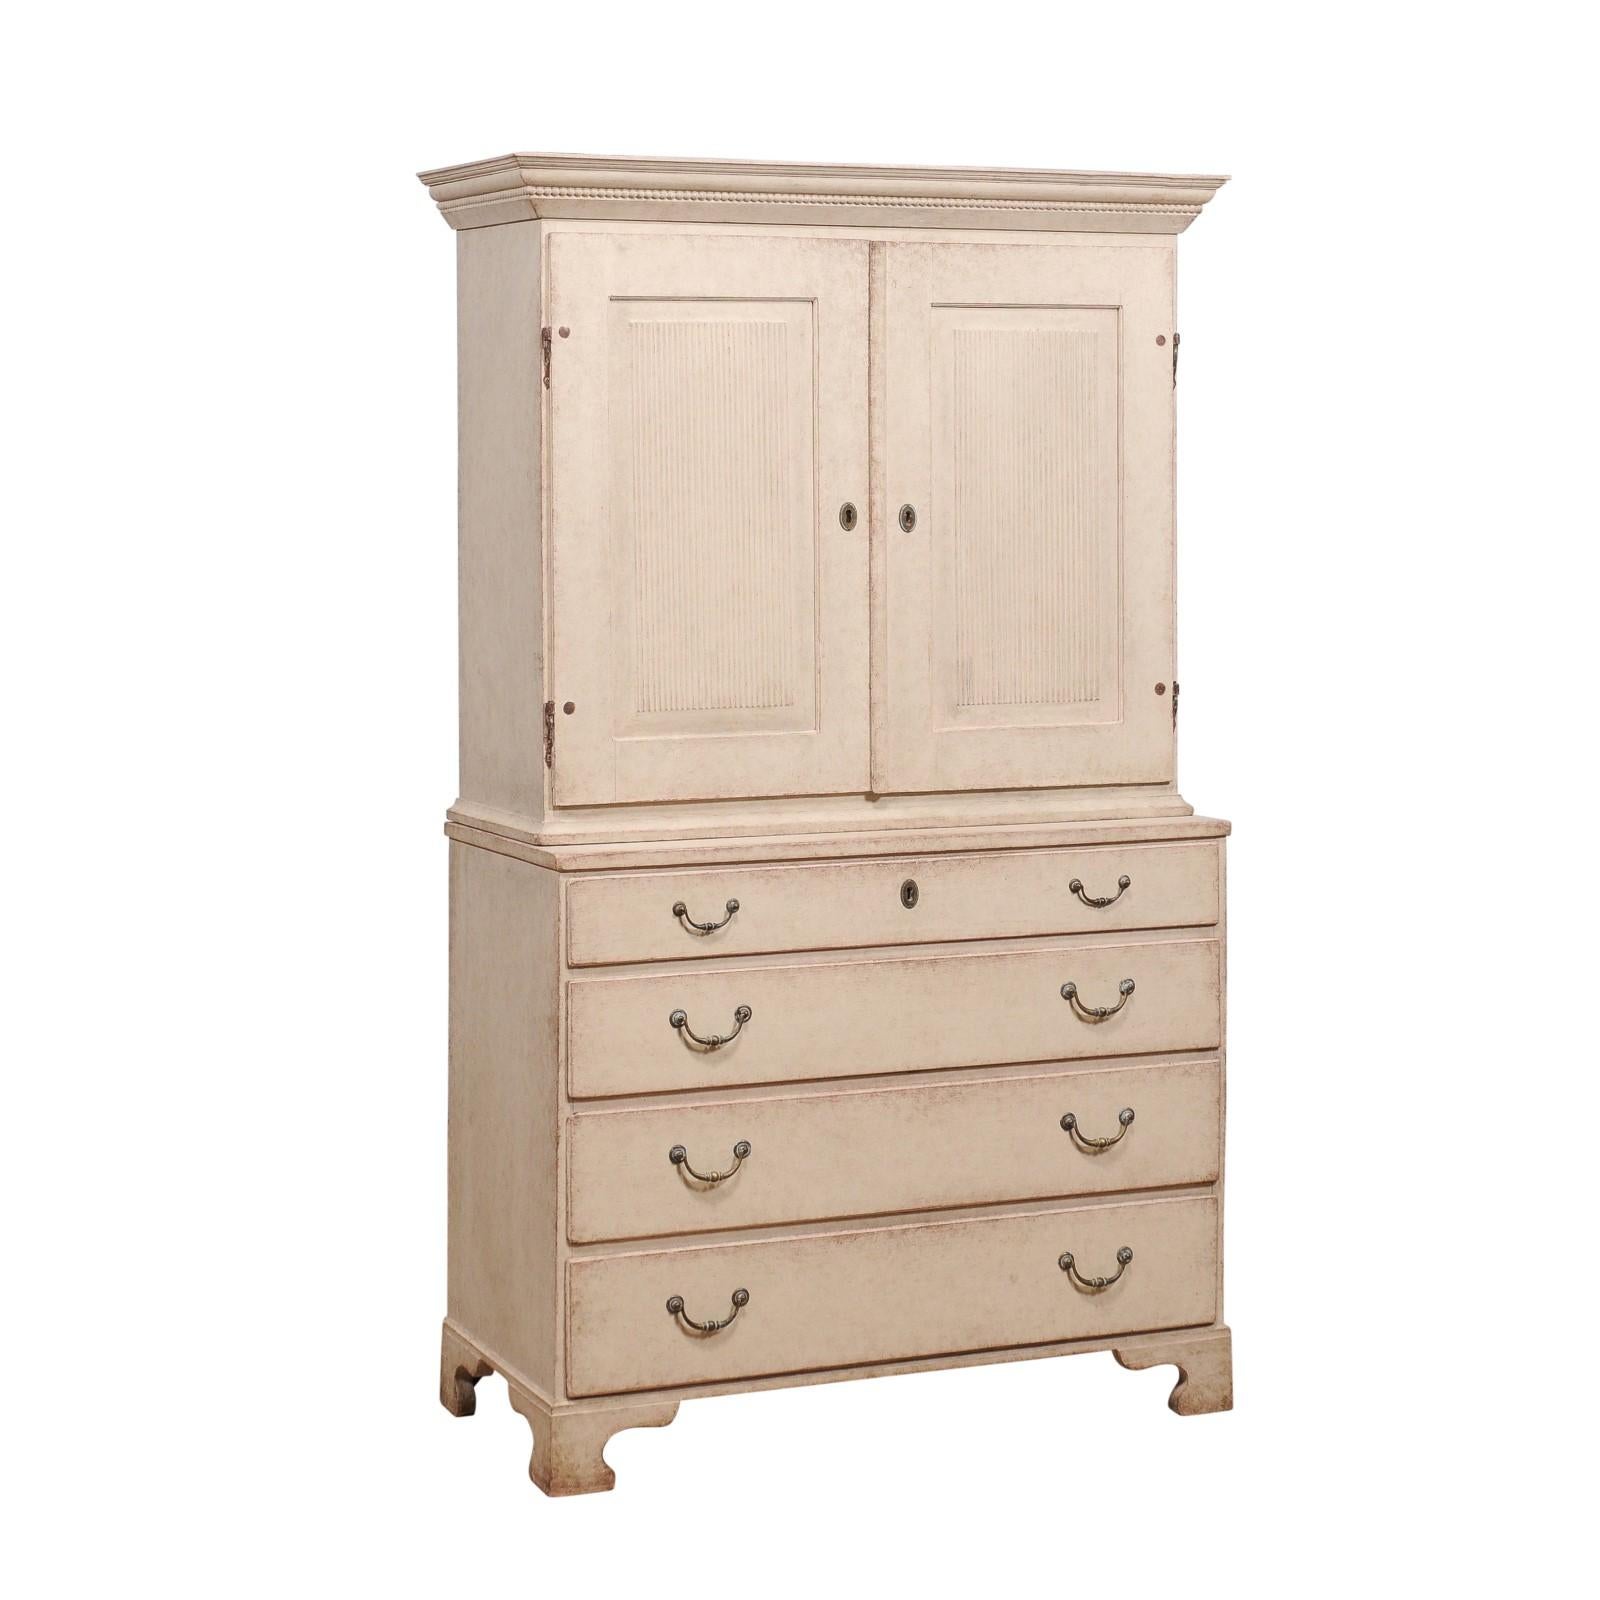 A Swedish two-part tall cabinet from circa 1834 with off white/cream/light grey painted finish, two doors with carved reeded panels, four graduated drawers and carved bracket feet. Step back in time with this exquisite Swedish two-part tall cabinet,